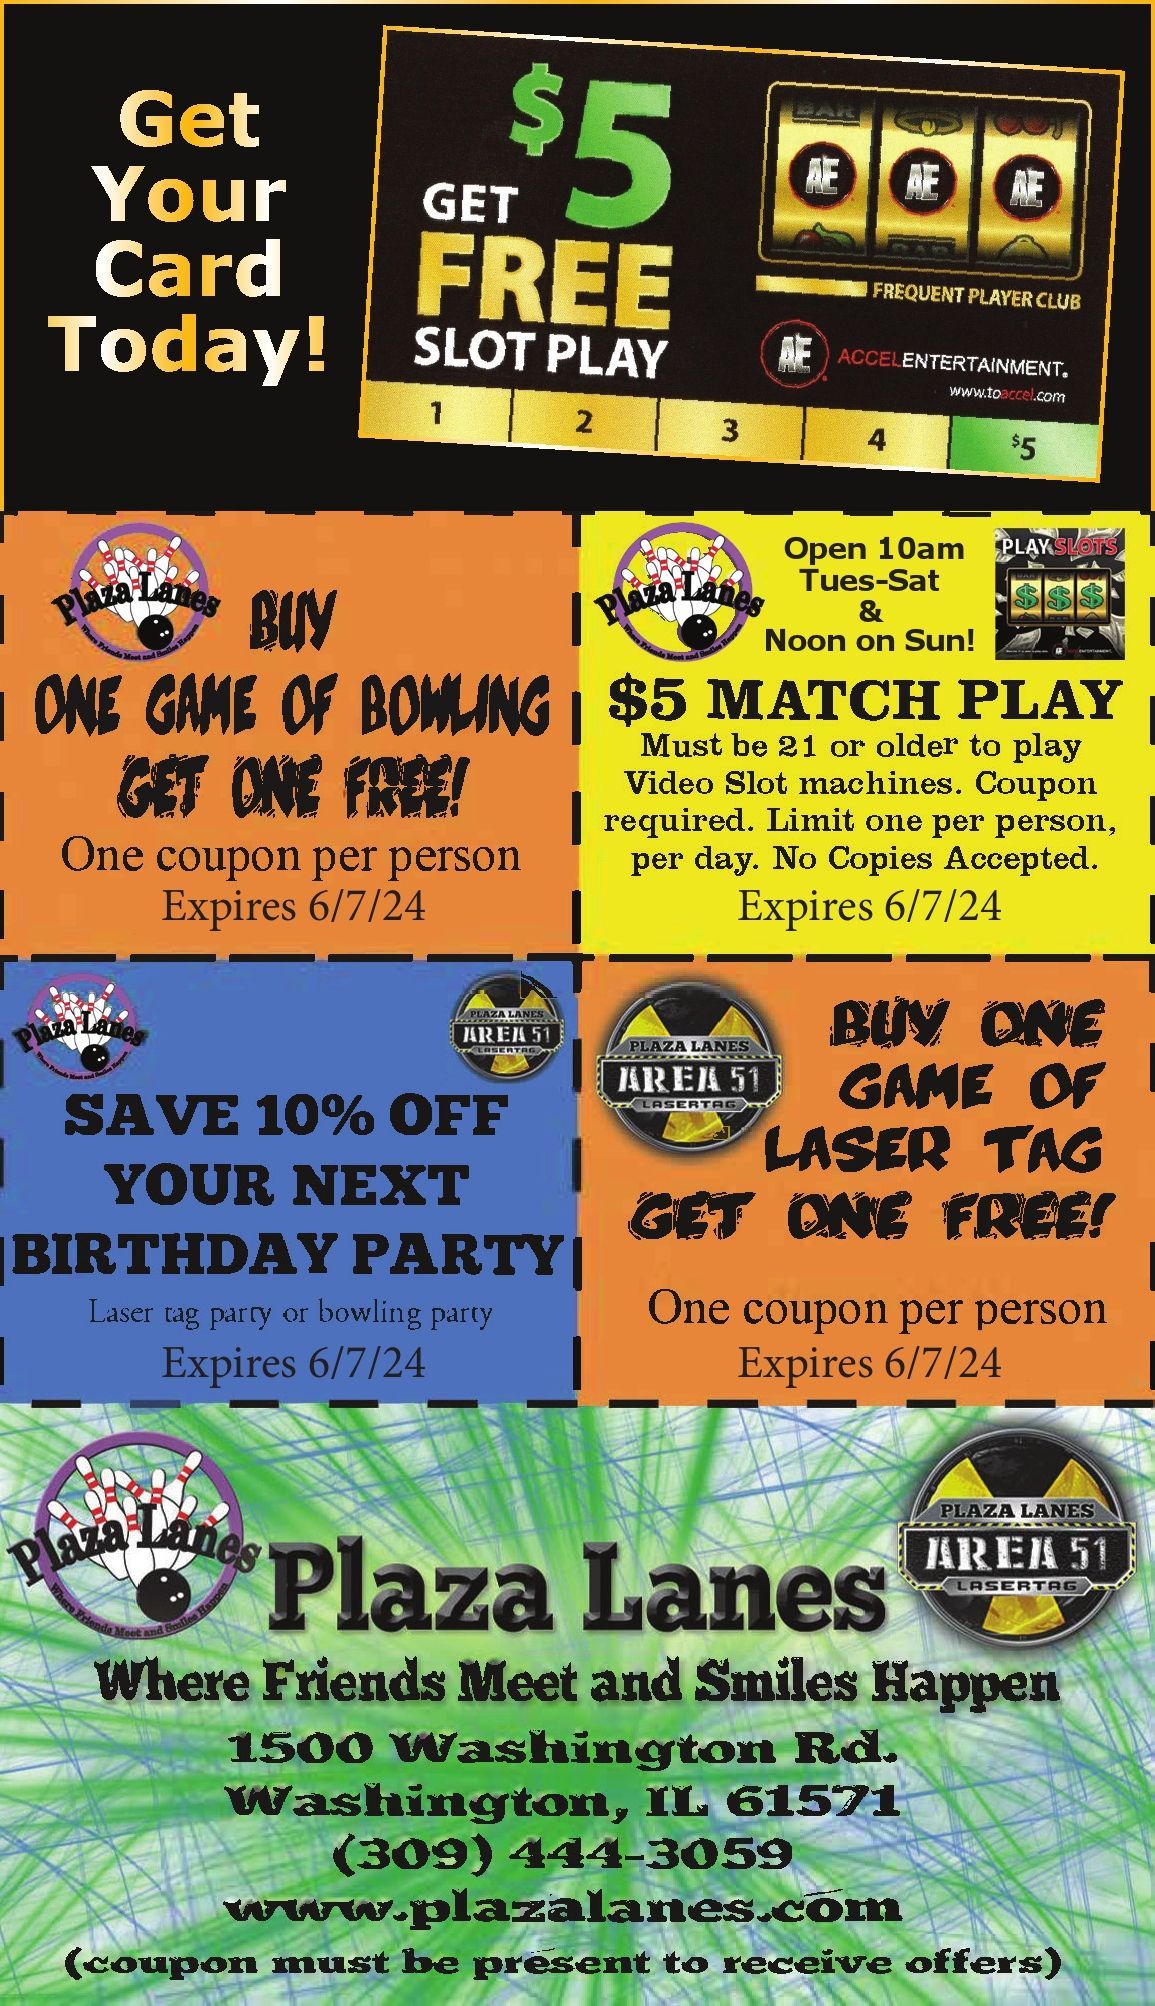 Plaza Lanes Open Bowling, Laser Tag and Birthday coupons, $5 free Match Play video gaming coupon. Washington, IL